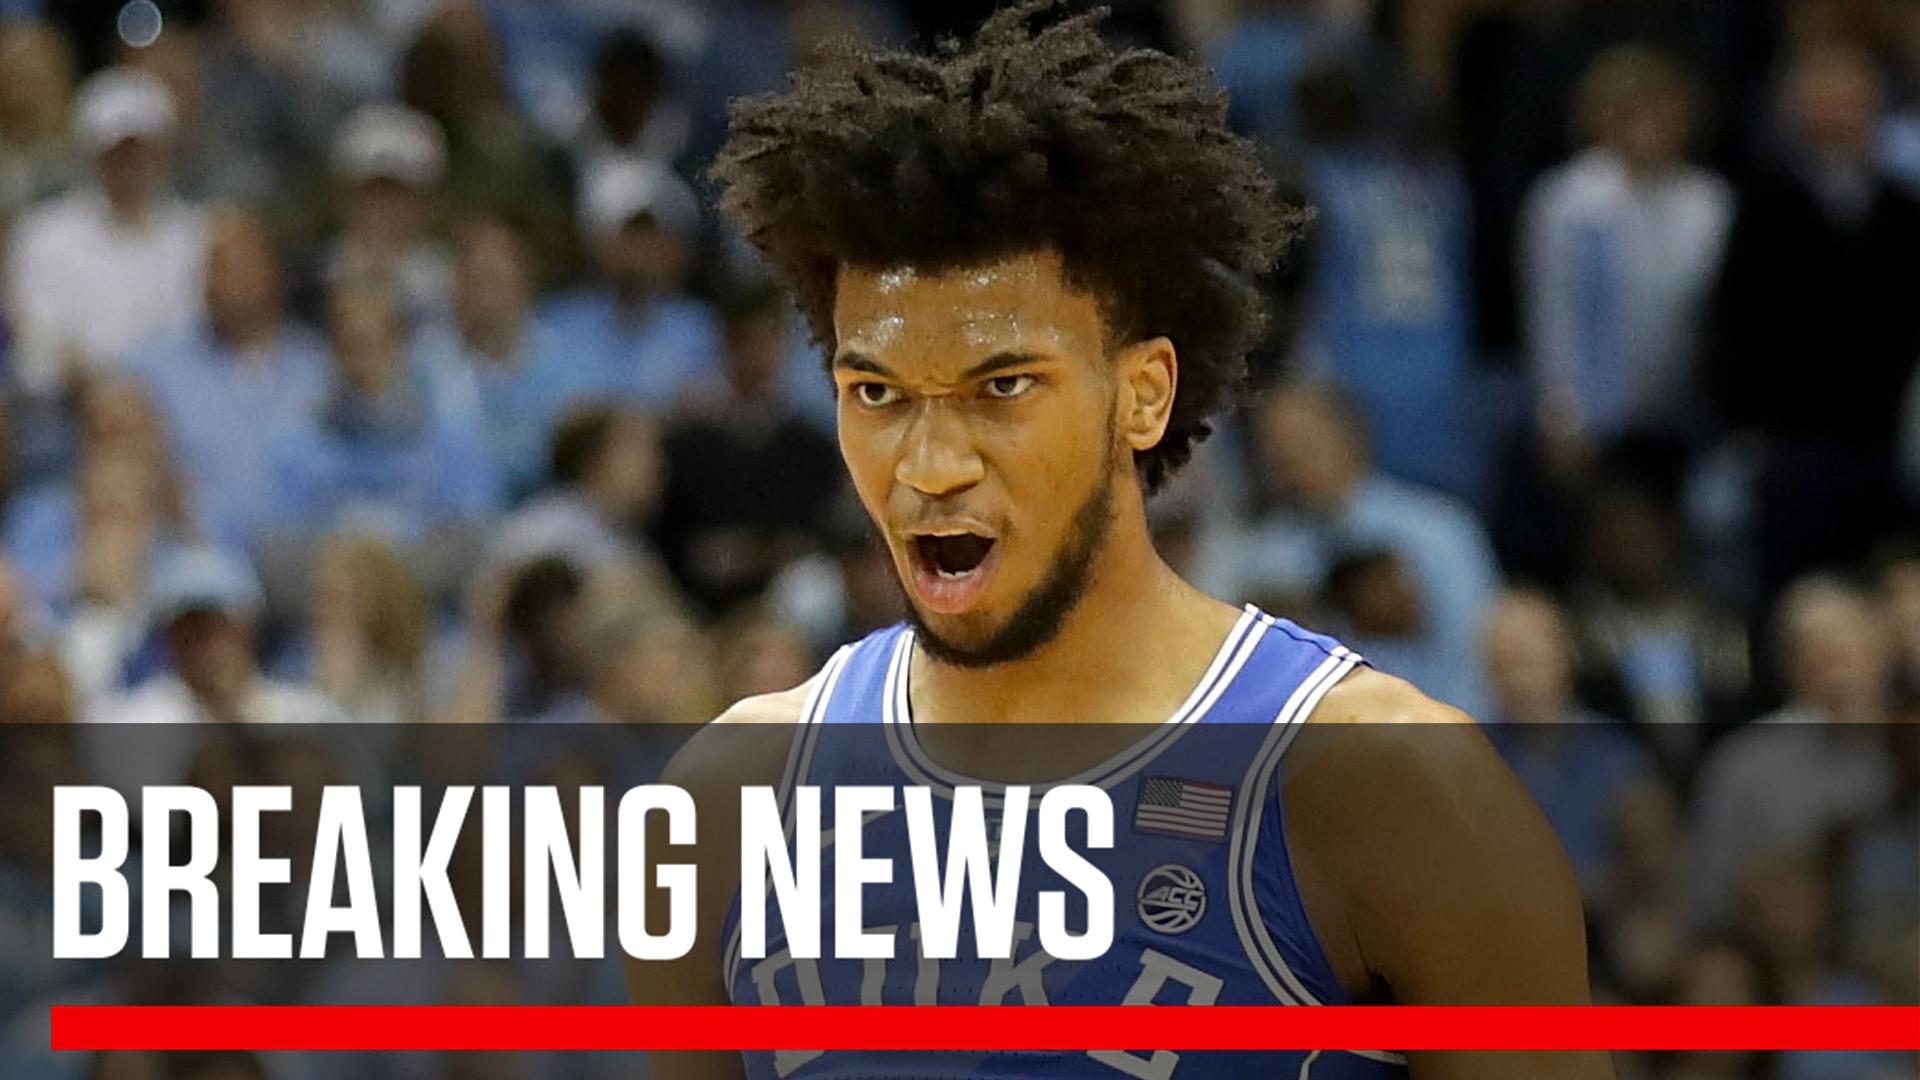 SportsCenter - Breaking: Marvin Bagley III declares for the NBA Draft after  1 season at Duke, he announced on his Instagram.